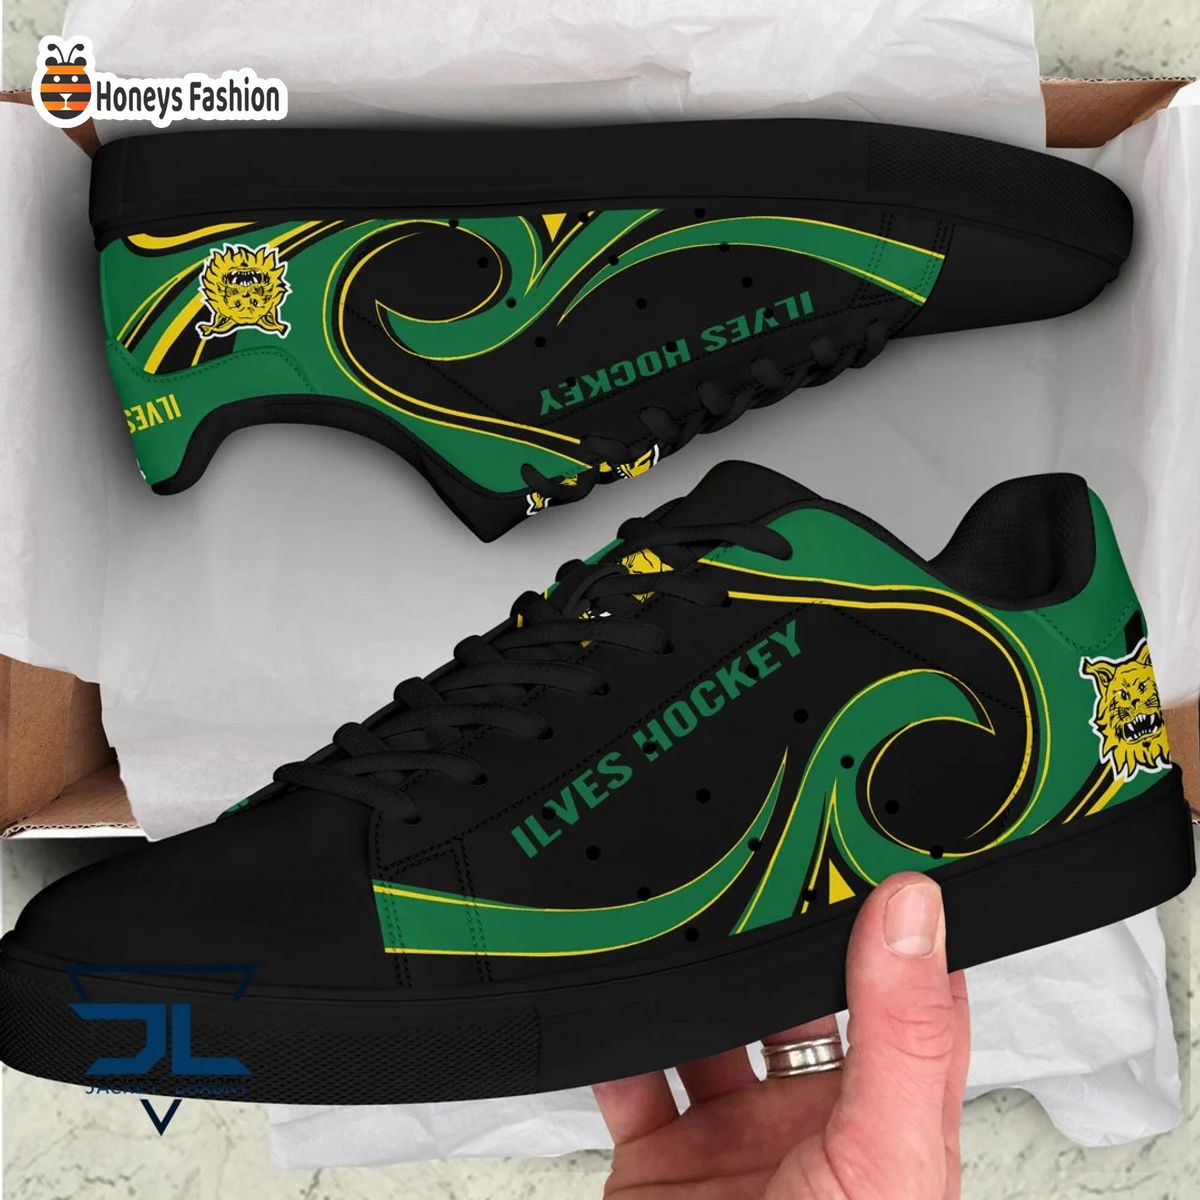 Ilves Hockey stan smith skate shoes